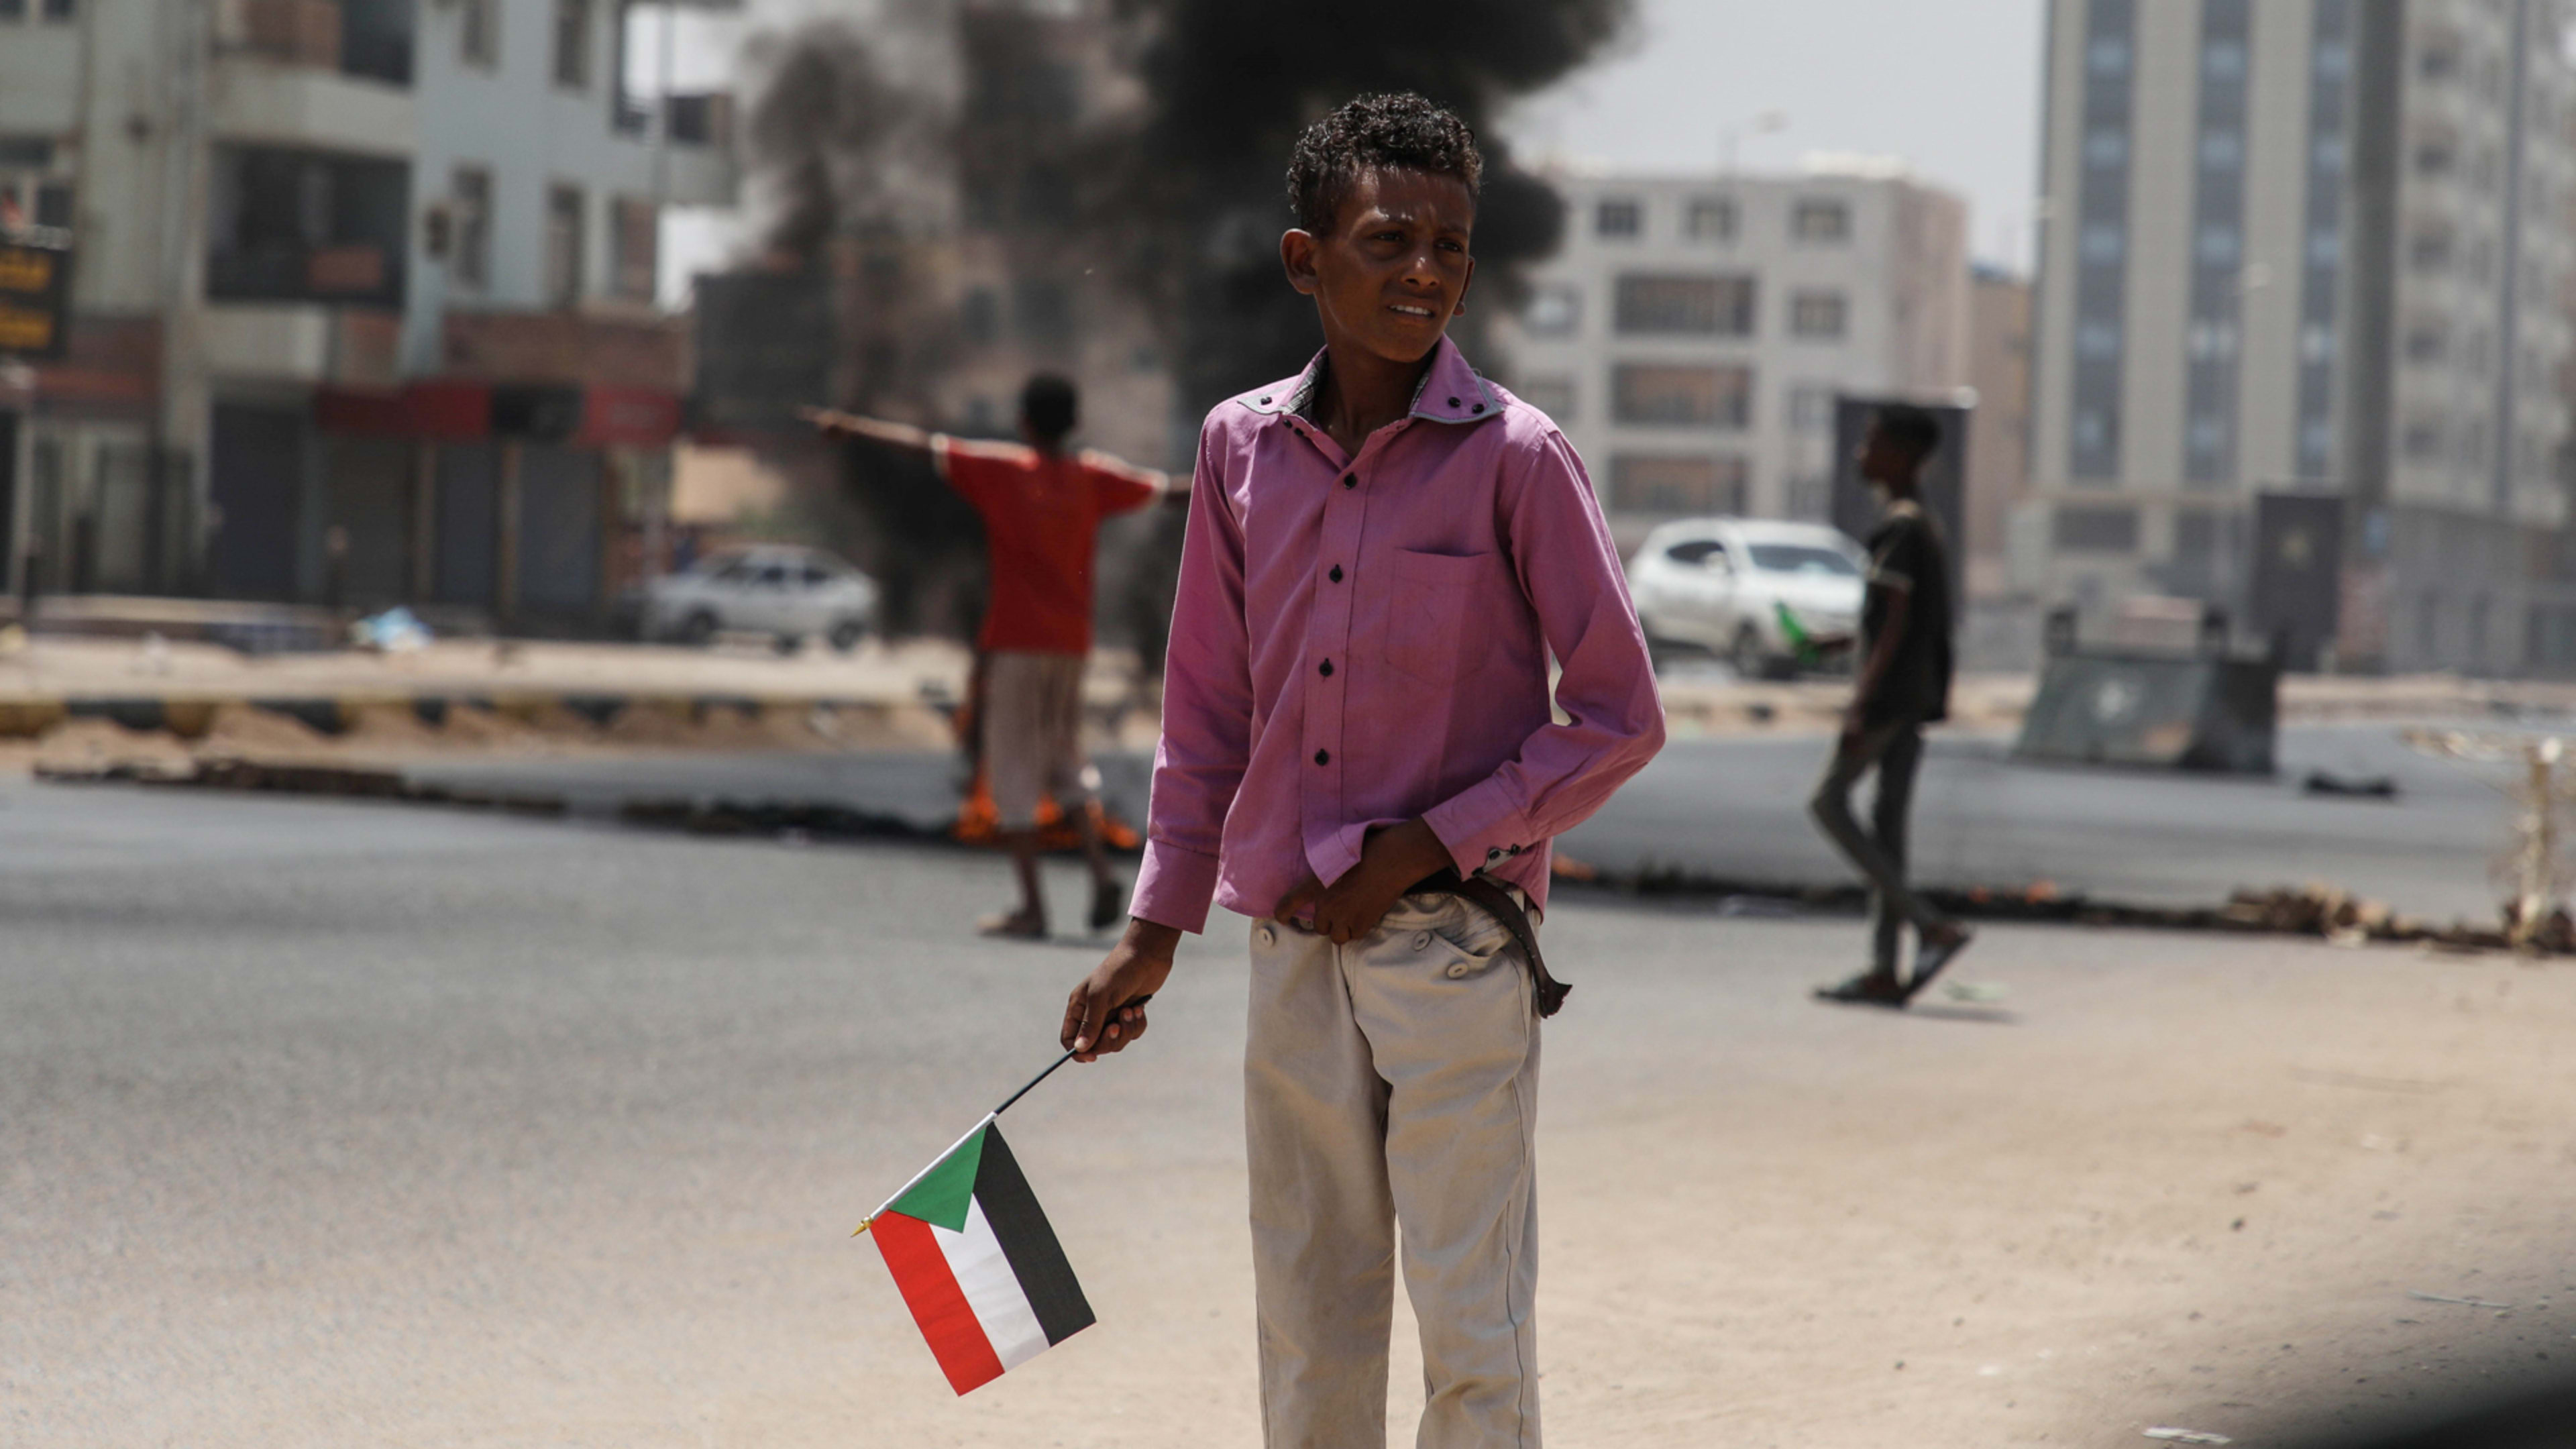 How to help Sudan: 7 things you can do right now for a country in crisis